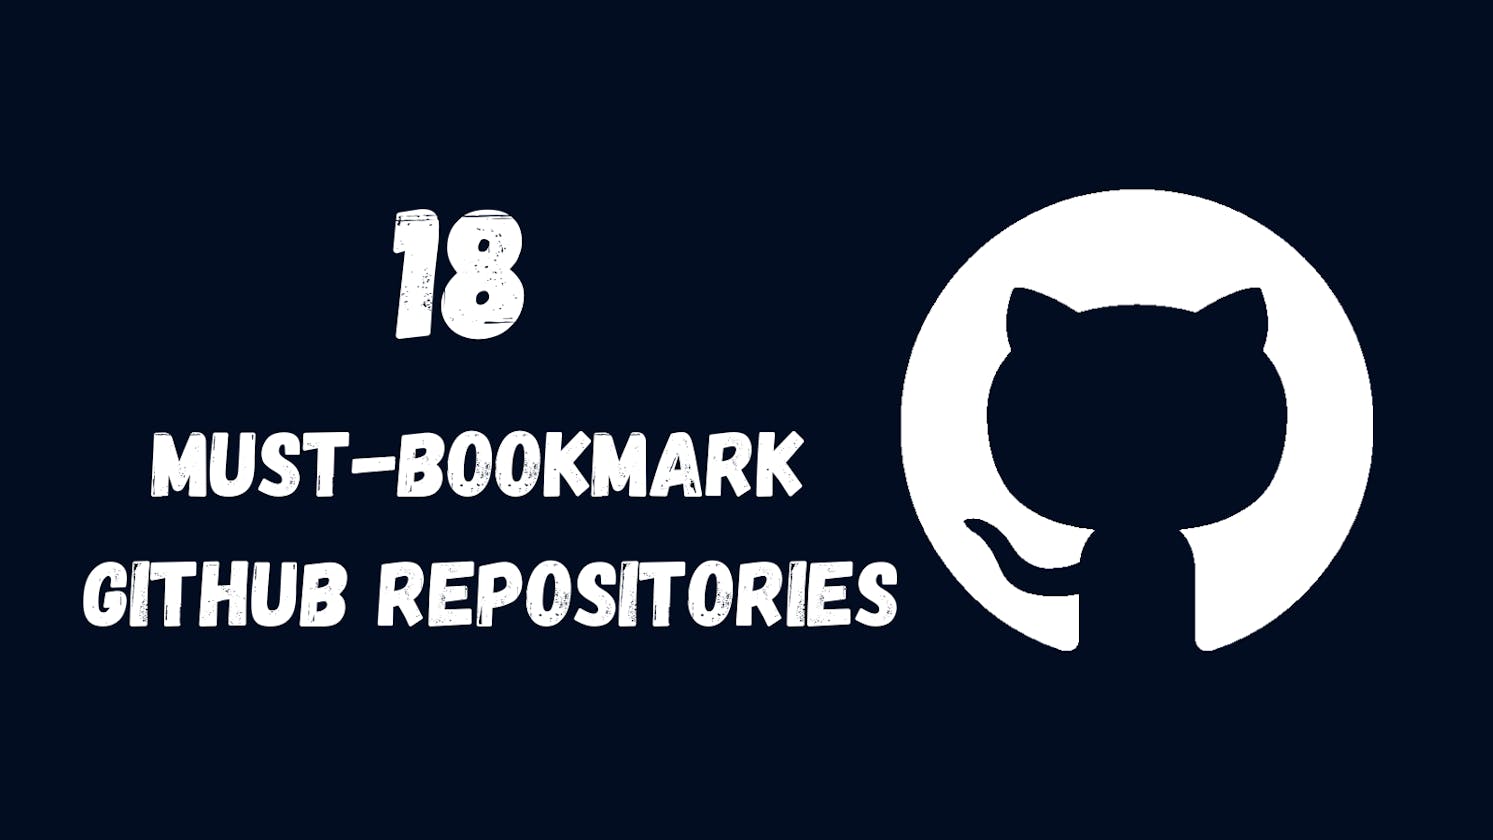 18 Must-Bookmark GitHub Repositories Every Developer Should Know